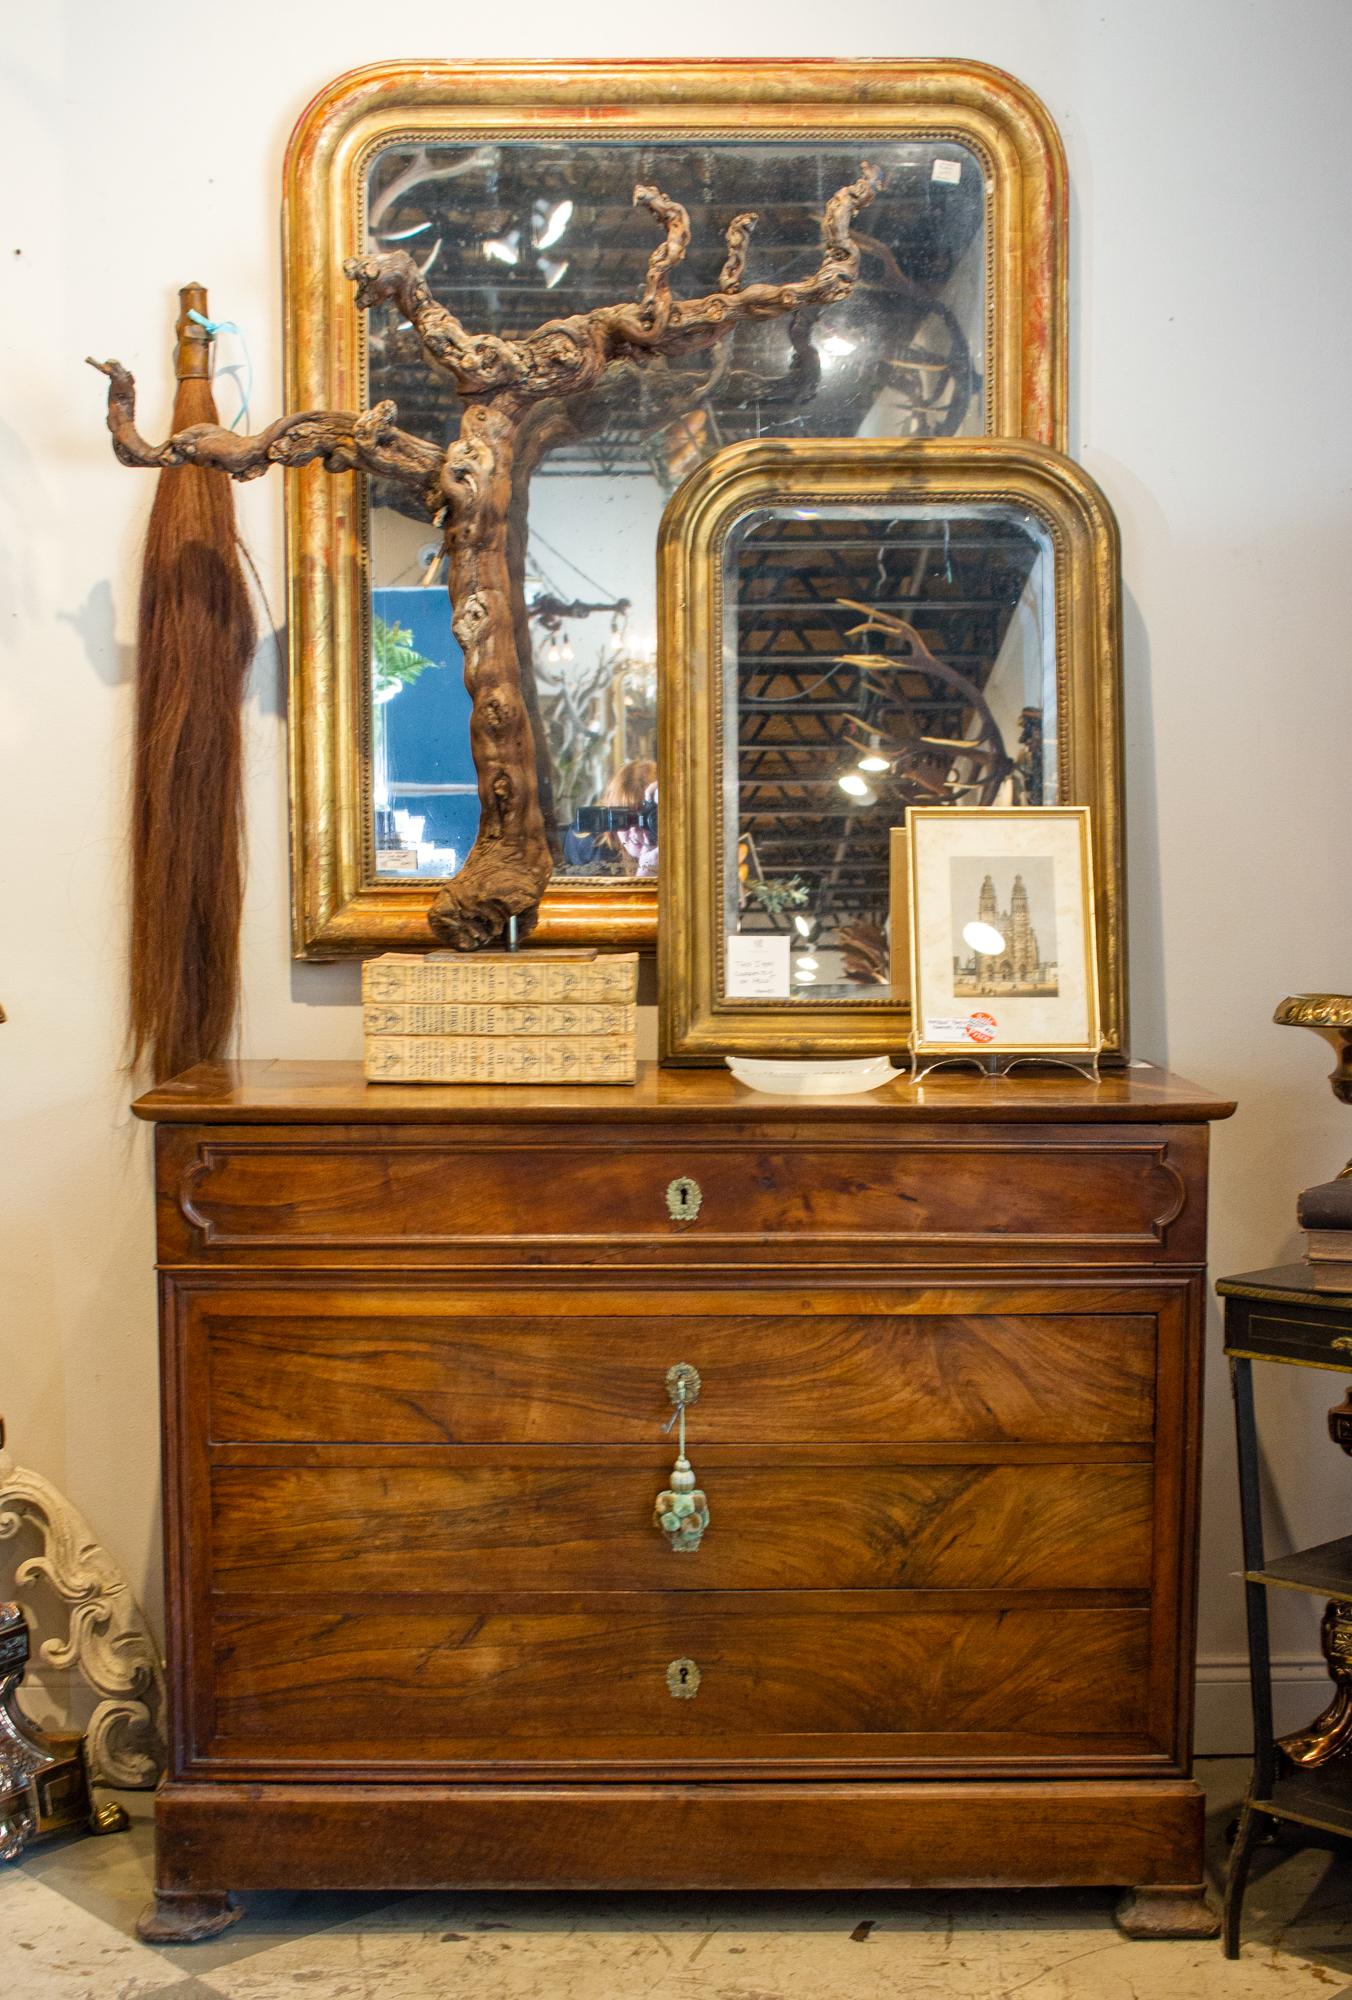 This antique French mahogany commode has many features that give it a Louis Philippe style, including the drawer design, which includes three main body drawers, along with a top drawer with a built-in bureau. There's also a narrow bottom drawer